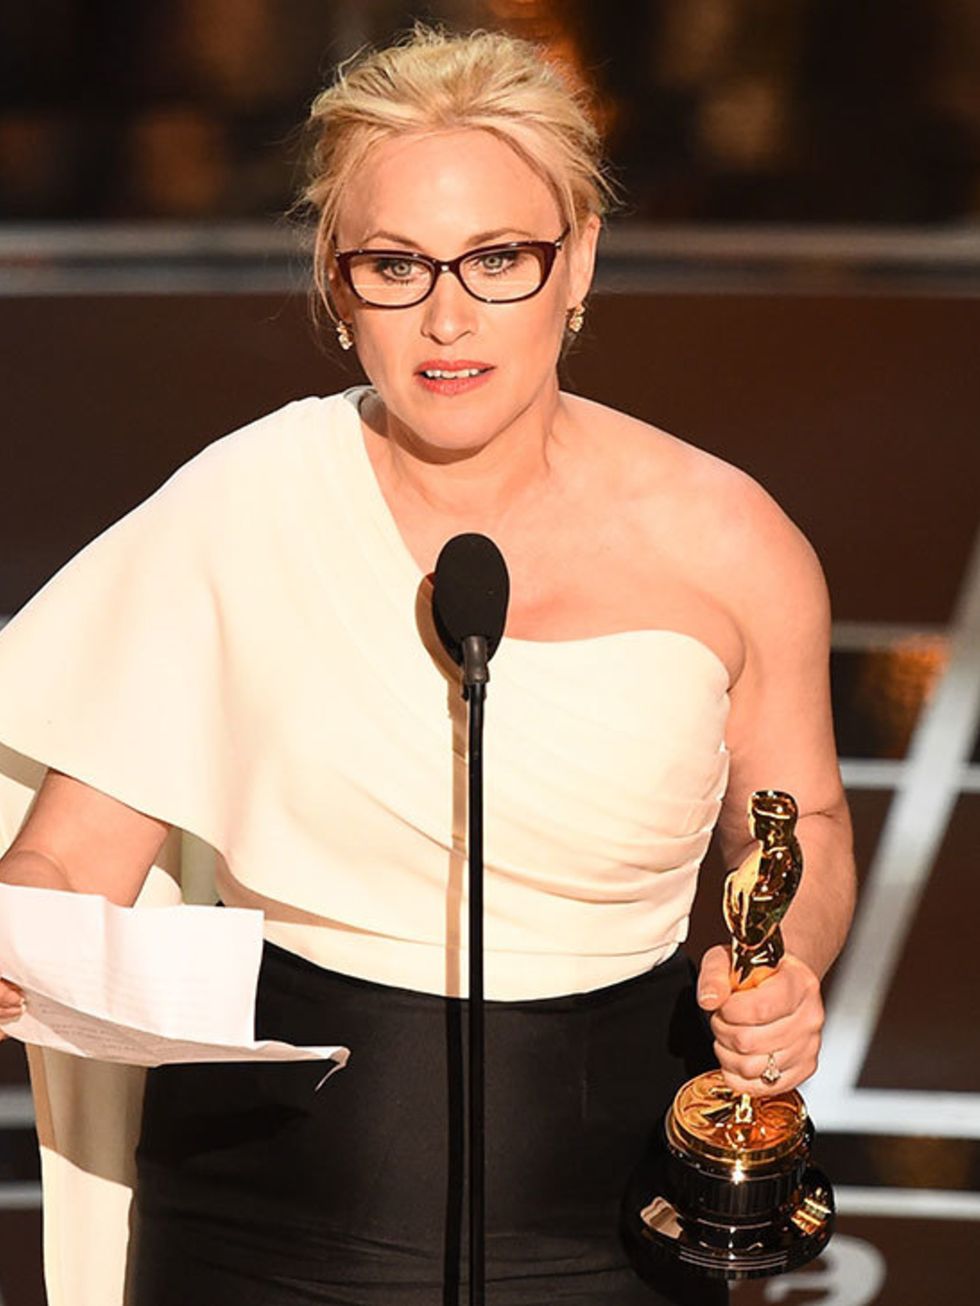 Patricia Arquette wins Best Supporting Actress for her role in 'Boyhood', at the 2015 Academy Awards.